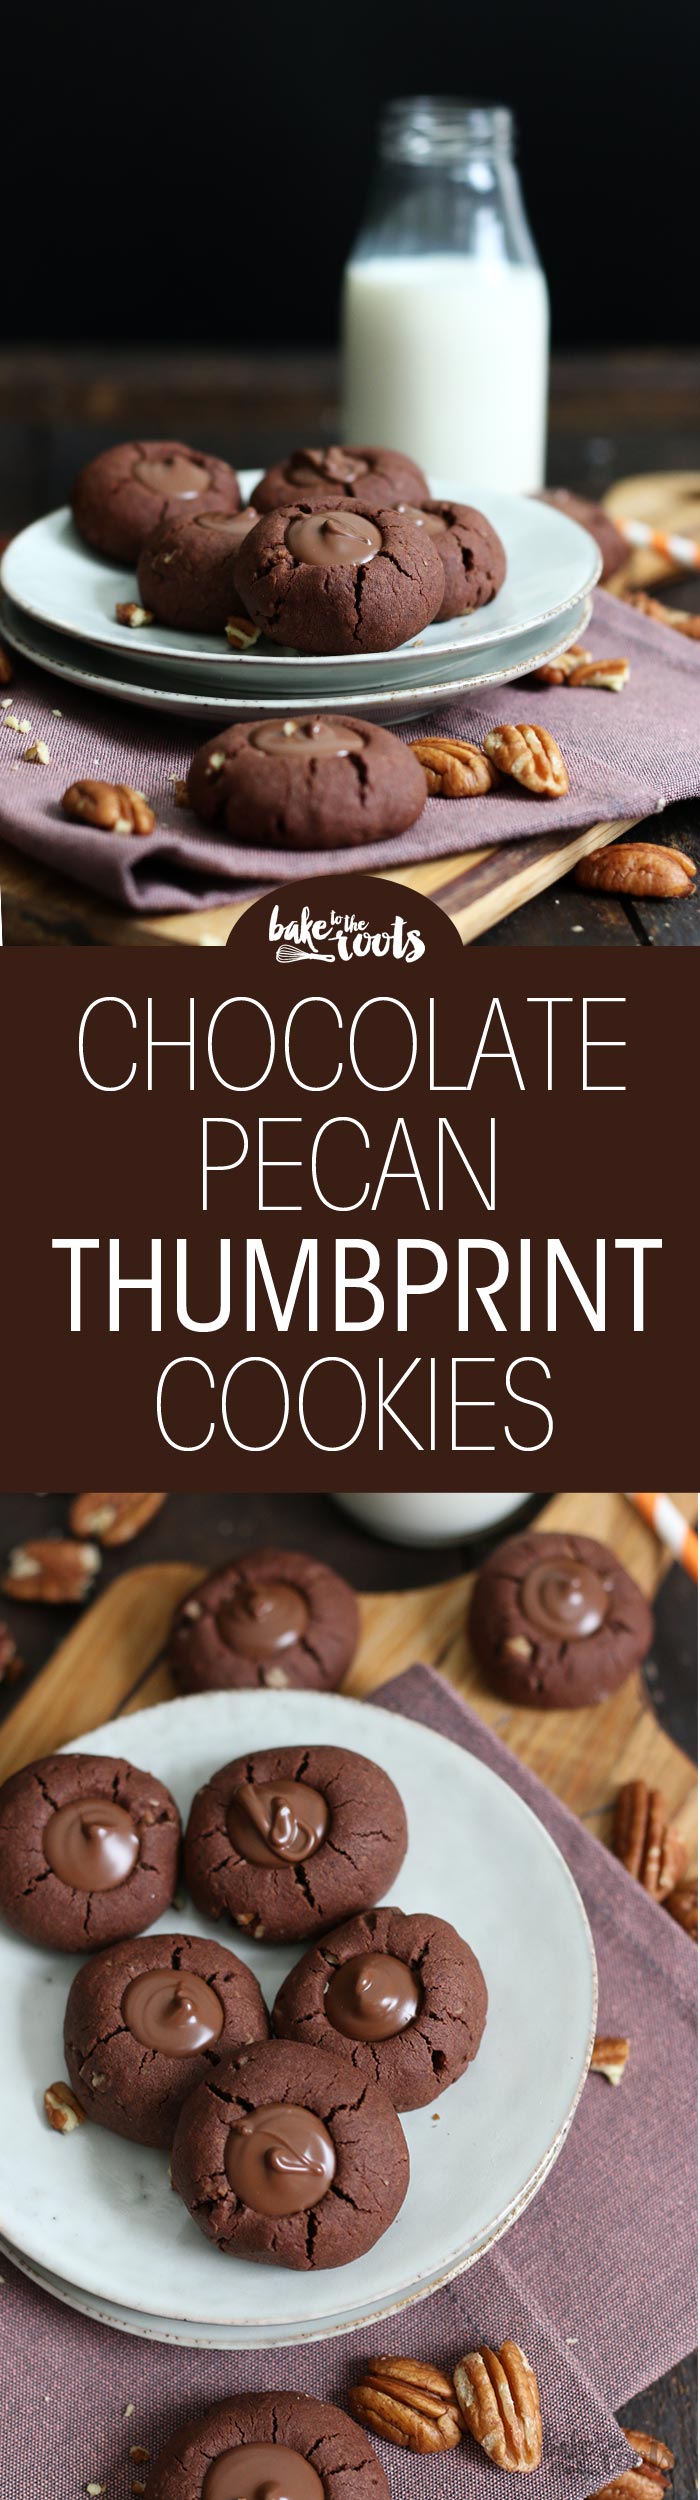 Delicious rich chocolate pecan thumbprint cookies with a chocolate filling | Bake to the roots